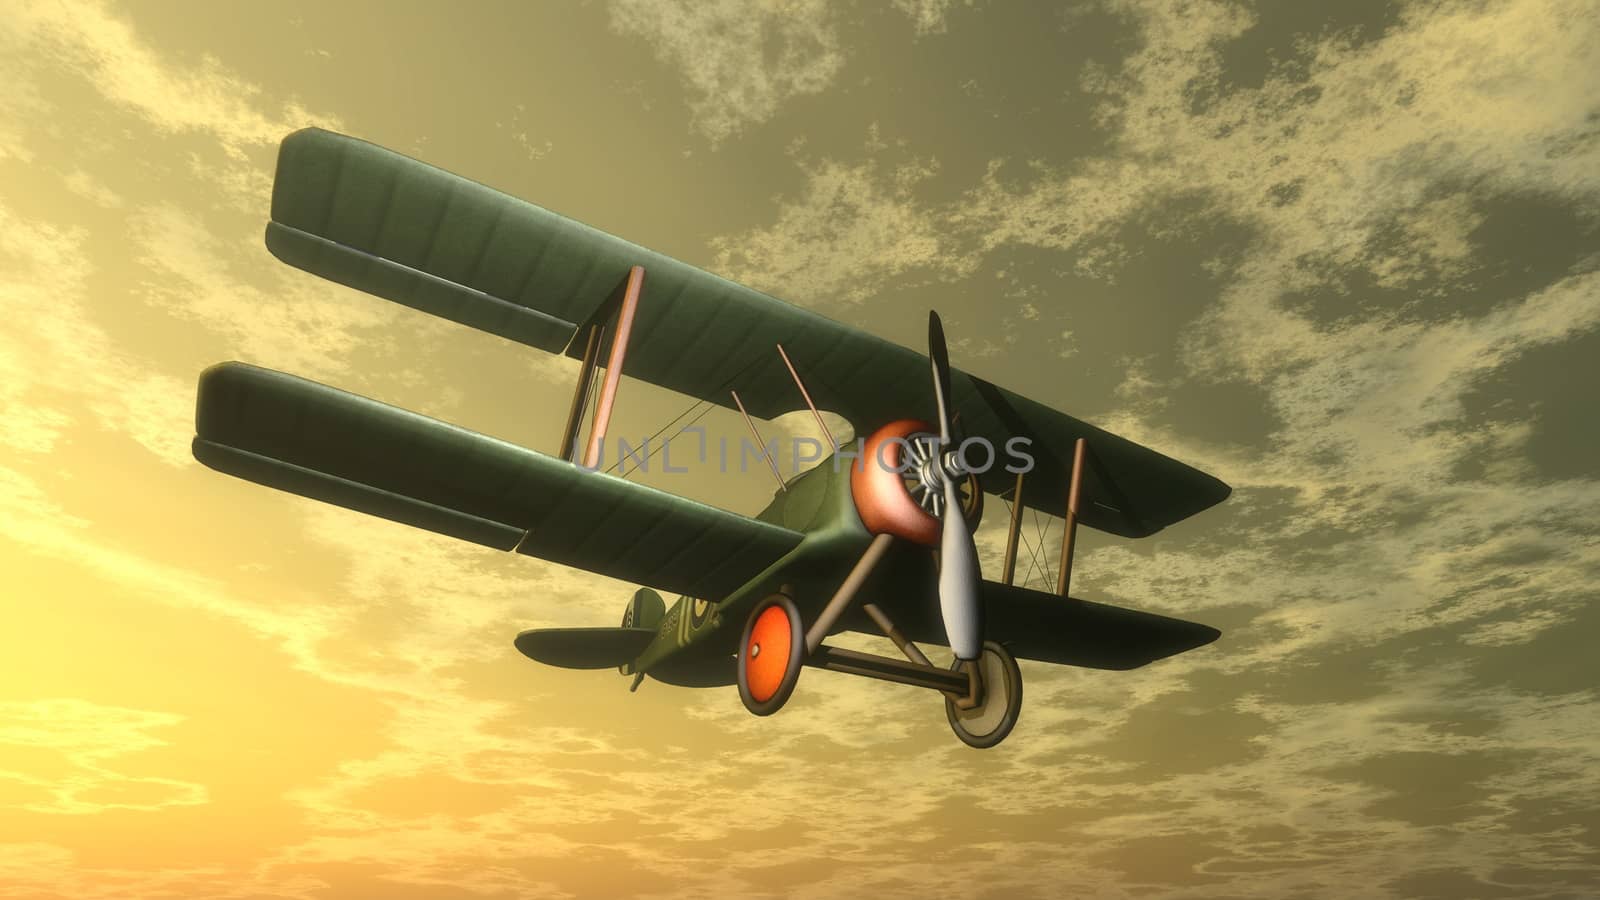 Biplane by sunset - 3D render by Elenaphotos21